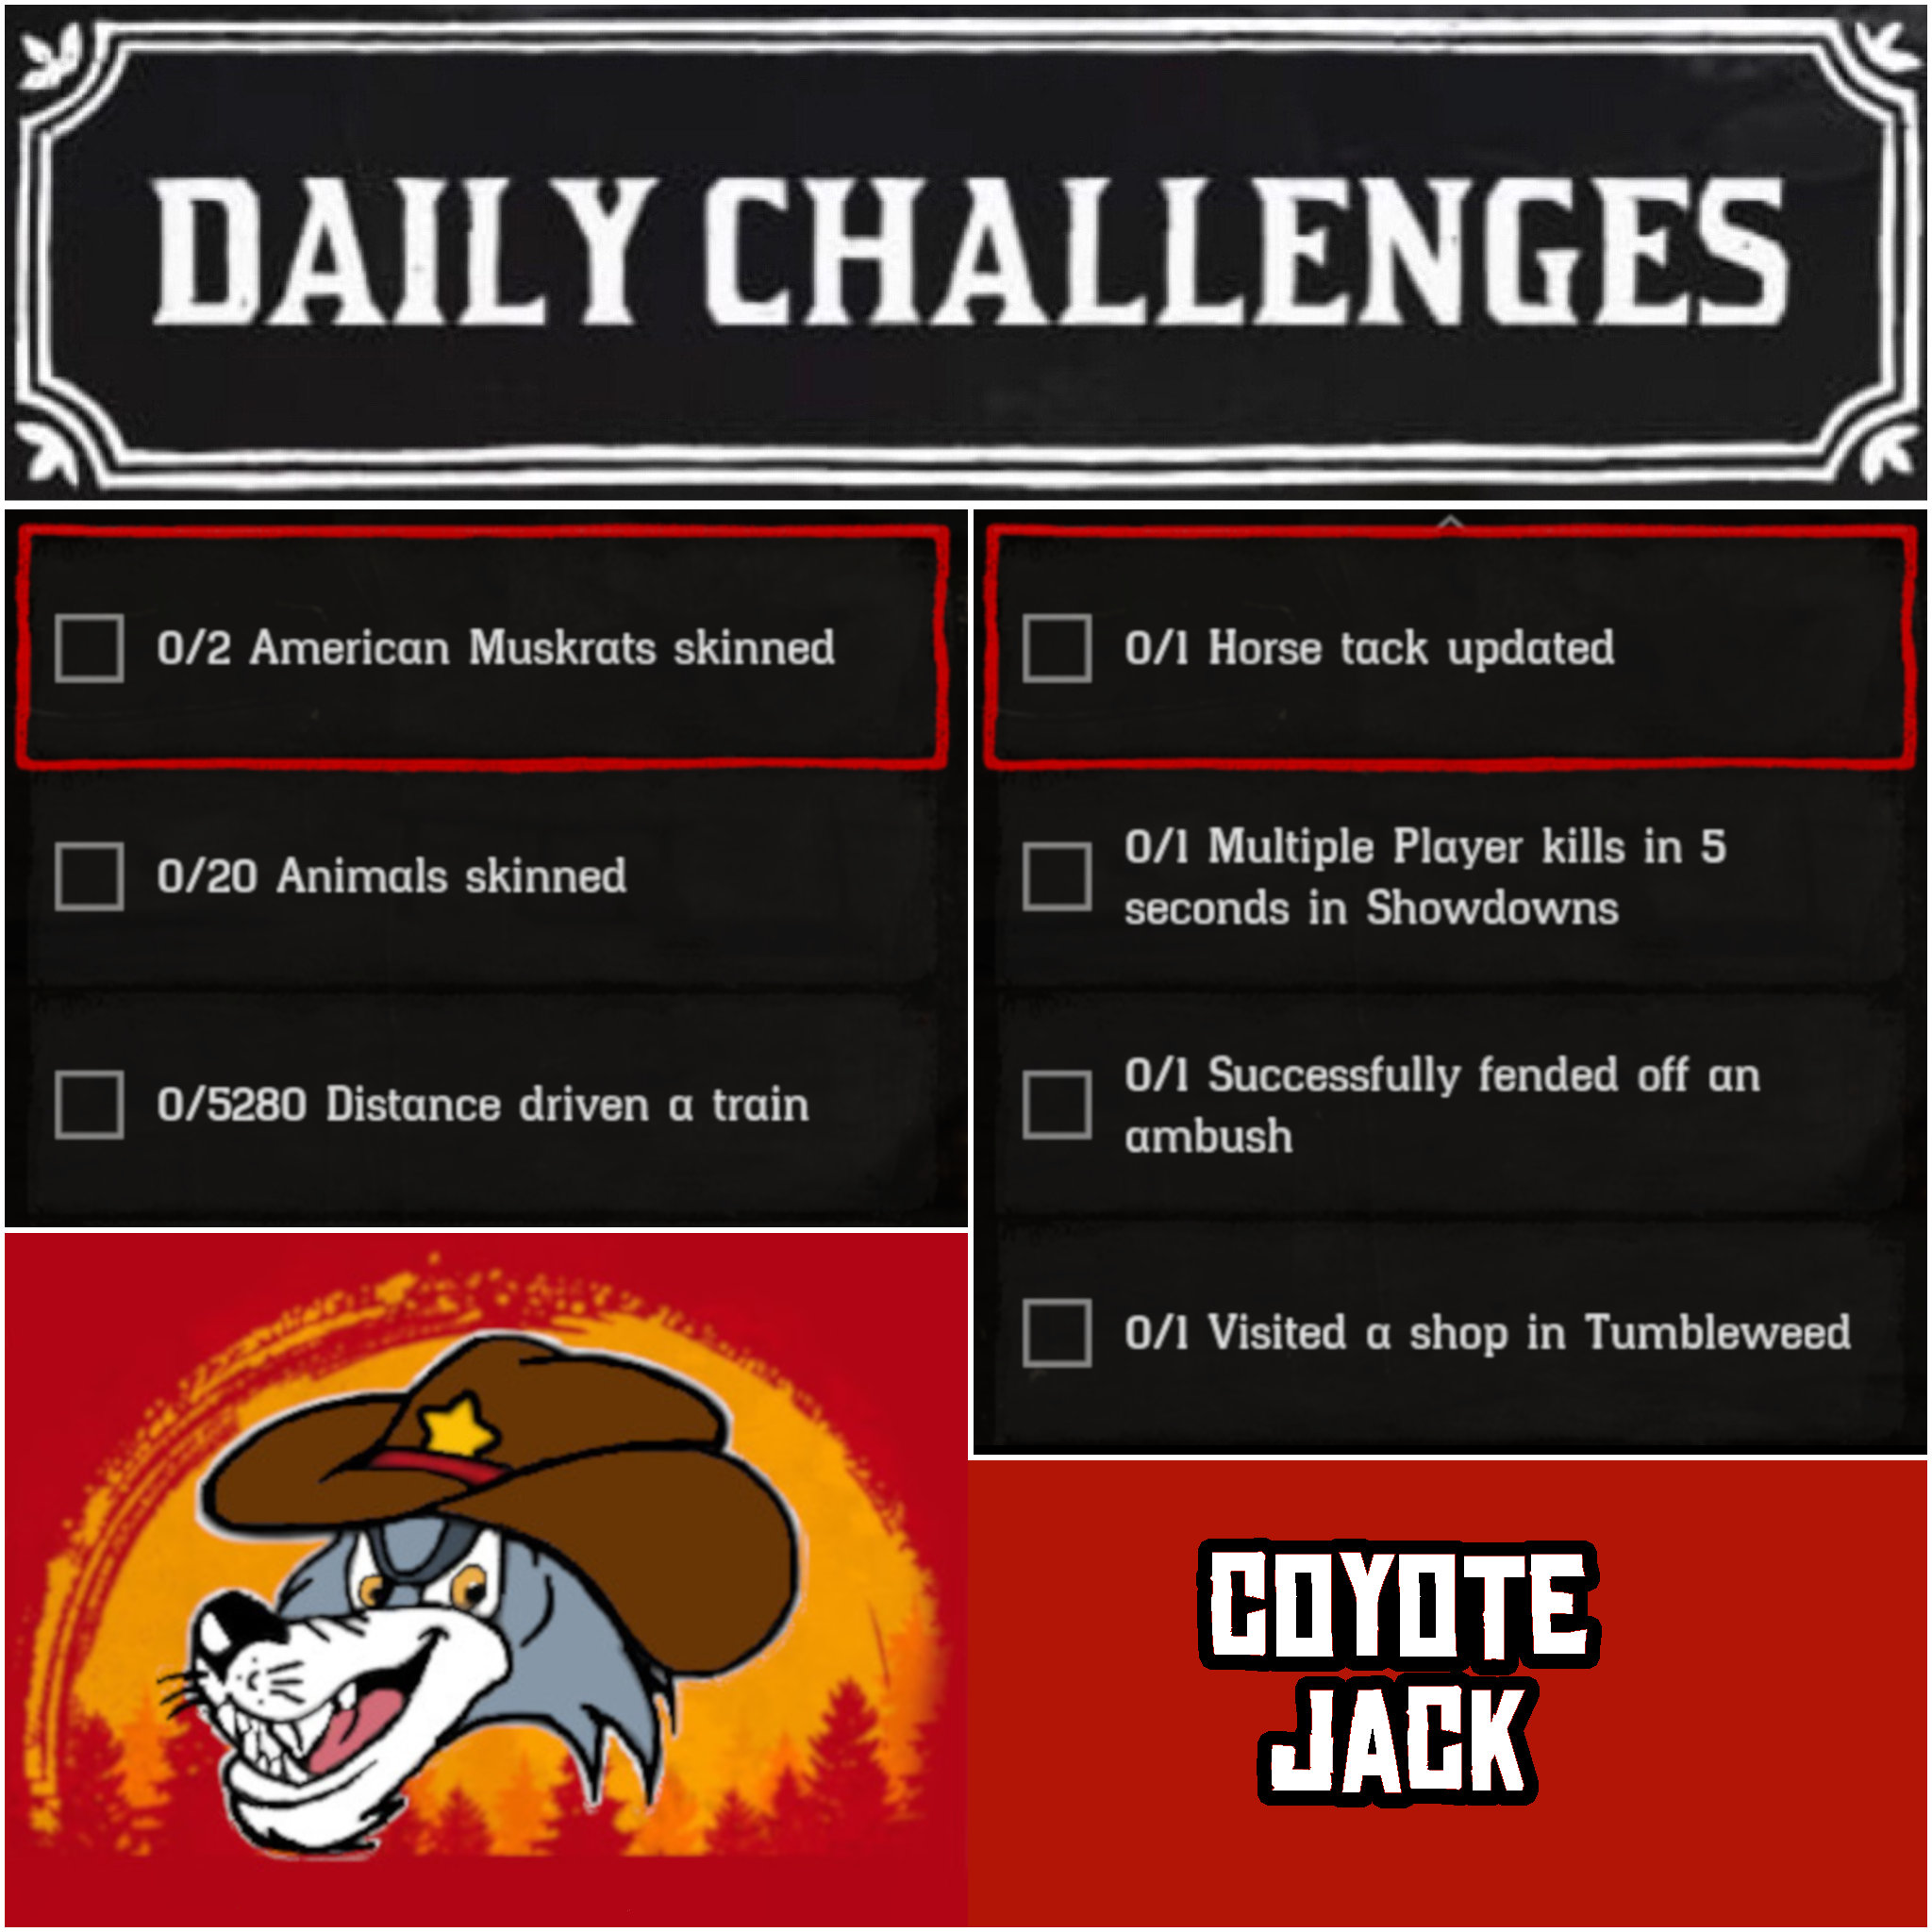 You are currently viewing Tuesday 08 December Daily Challenges